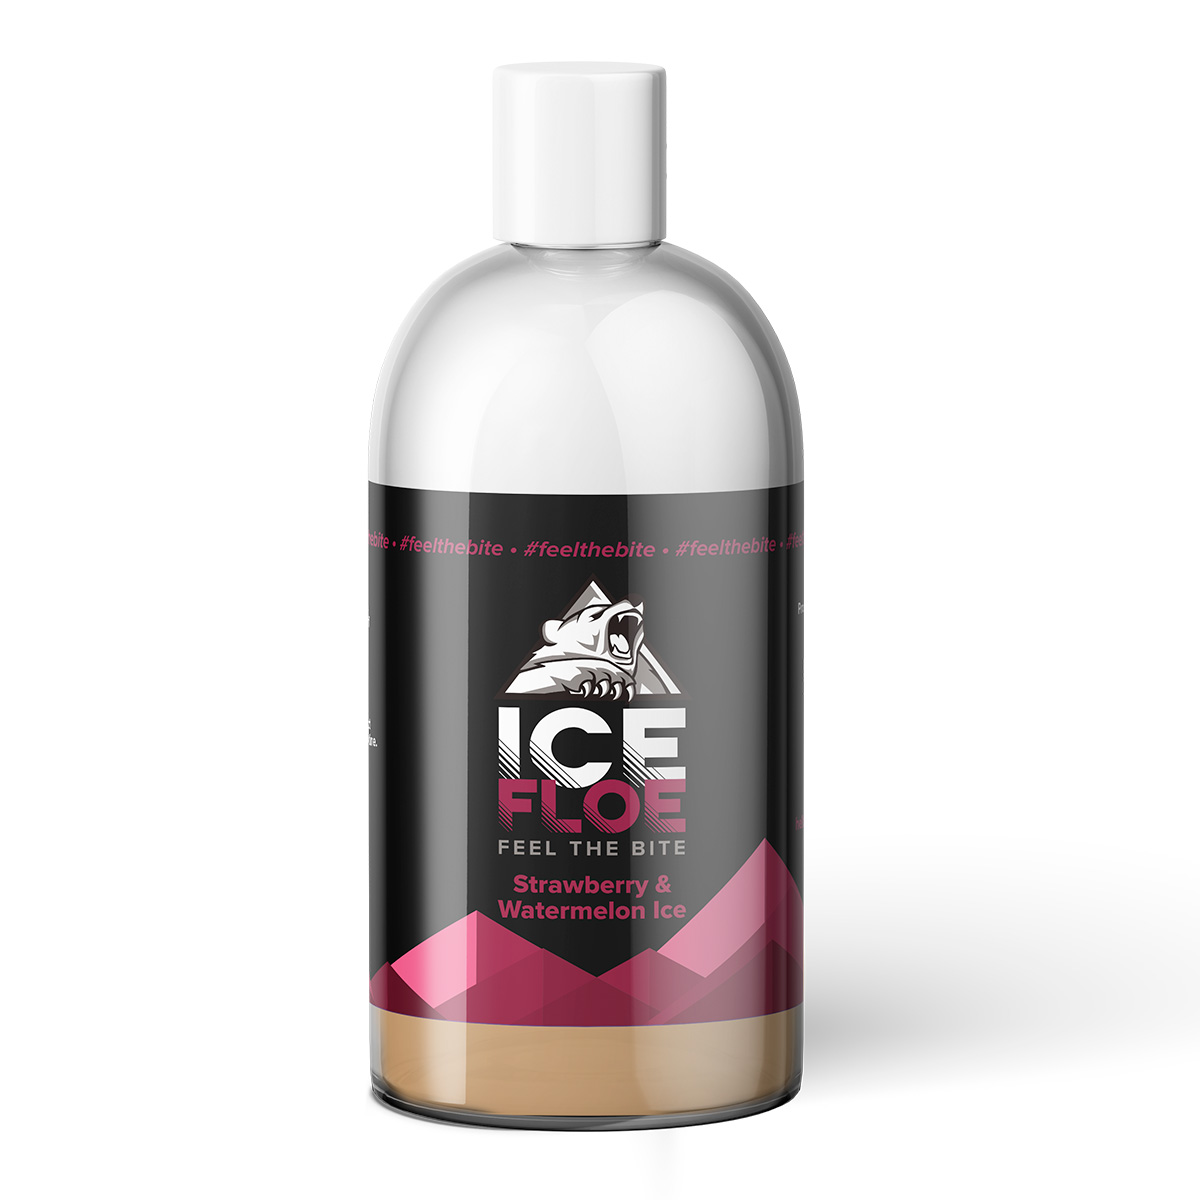 Strawberry & Watermelon Ice Flavour Shot by Ice Floe - 250ml